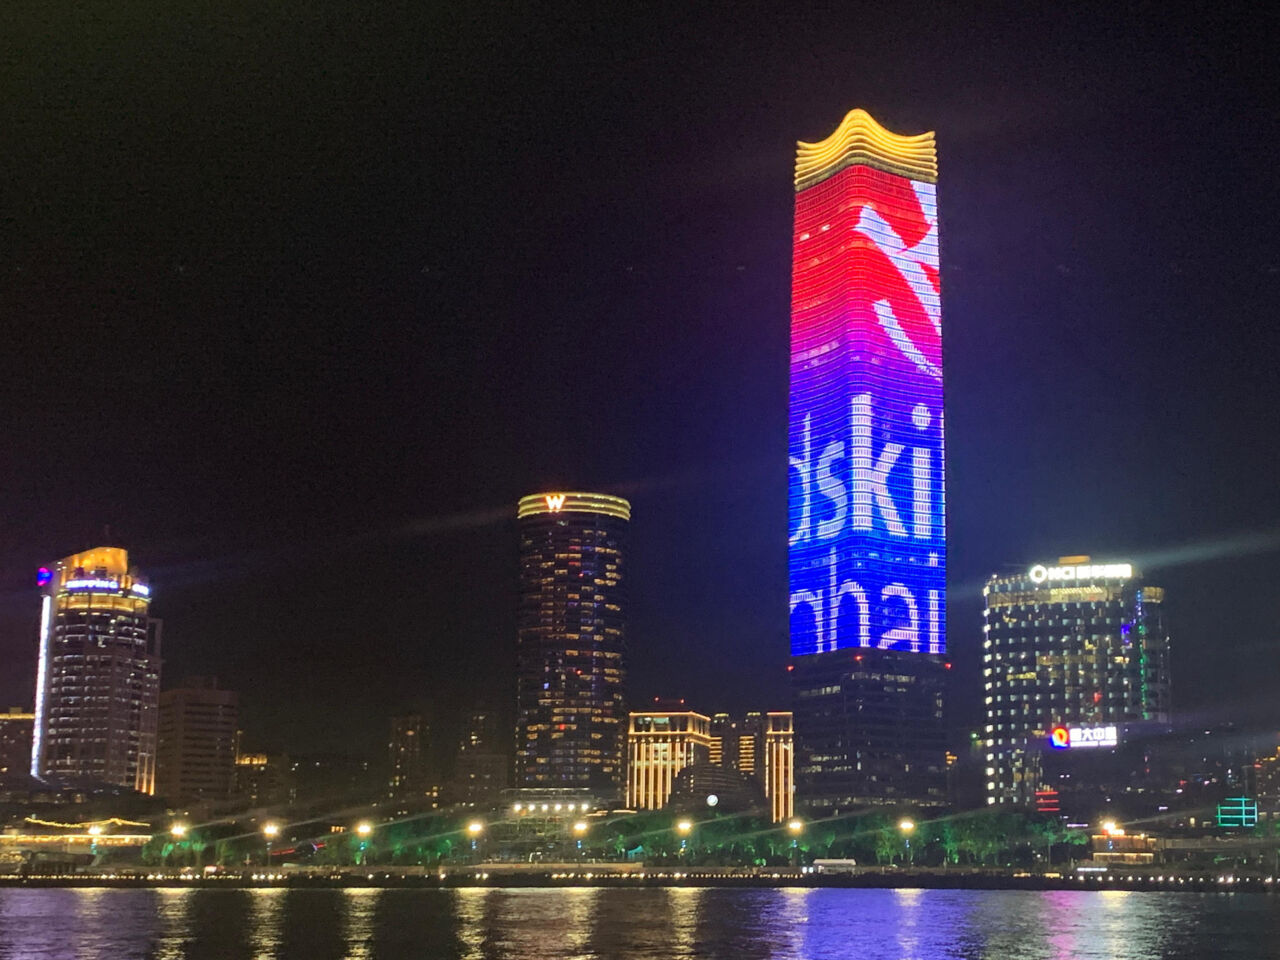 A tower in Shanghai lit up with WorldSkills branding as part of the celebrations for World Youth Skills Day on 15 July 2021.
